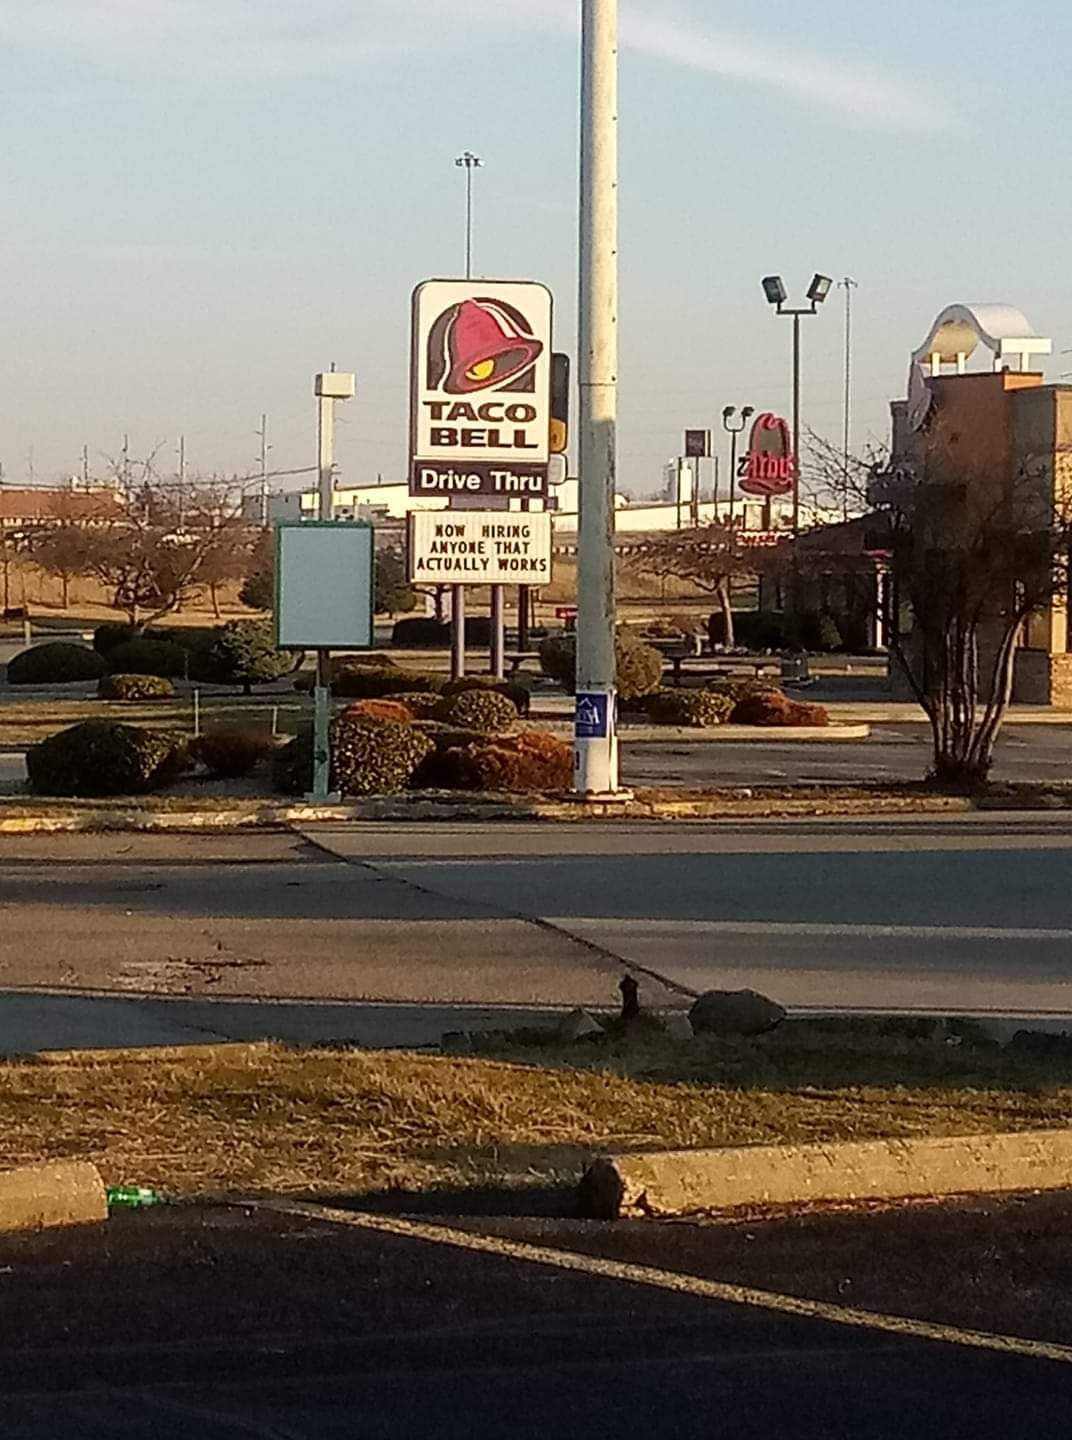 My hometown Taco Bell.